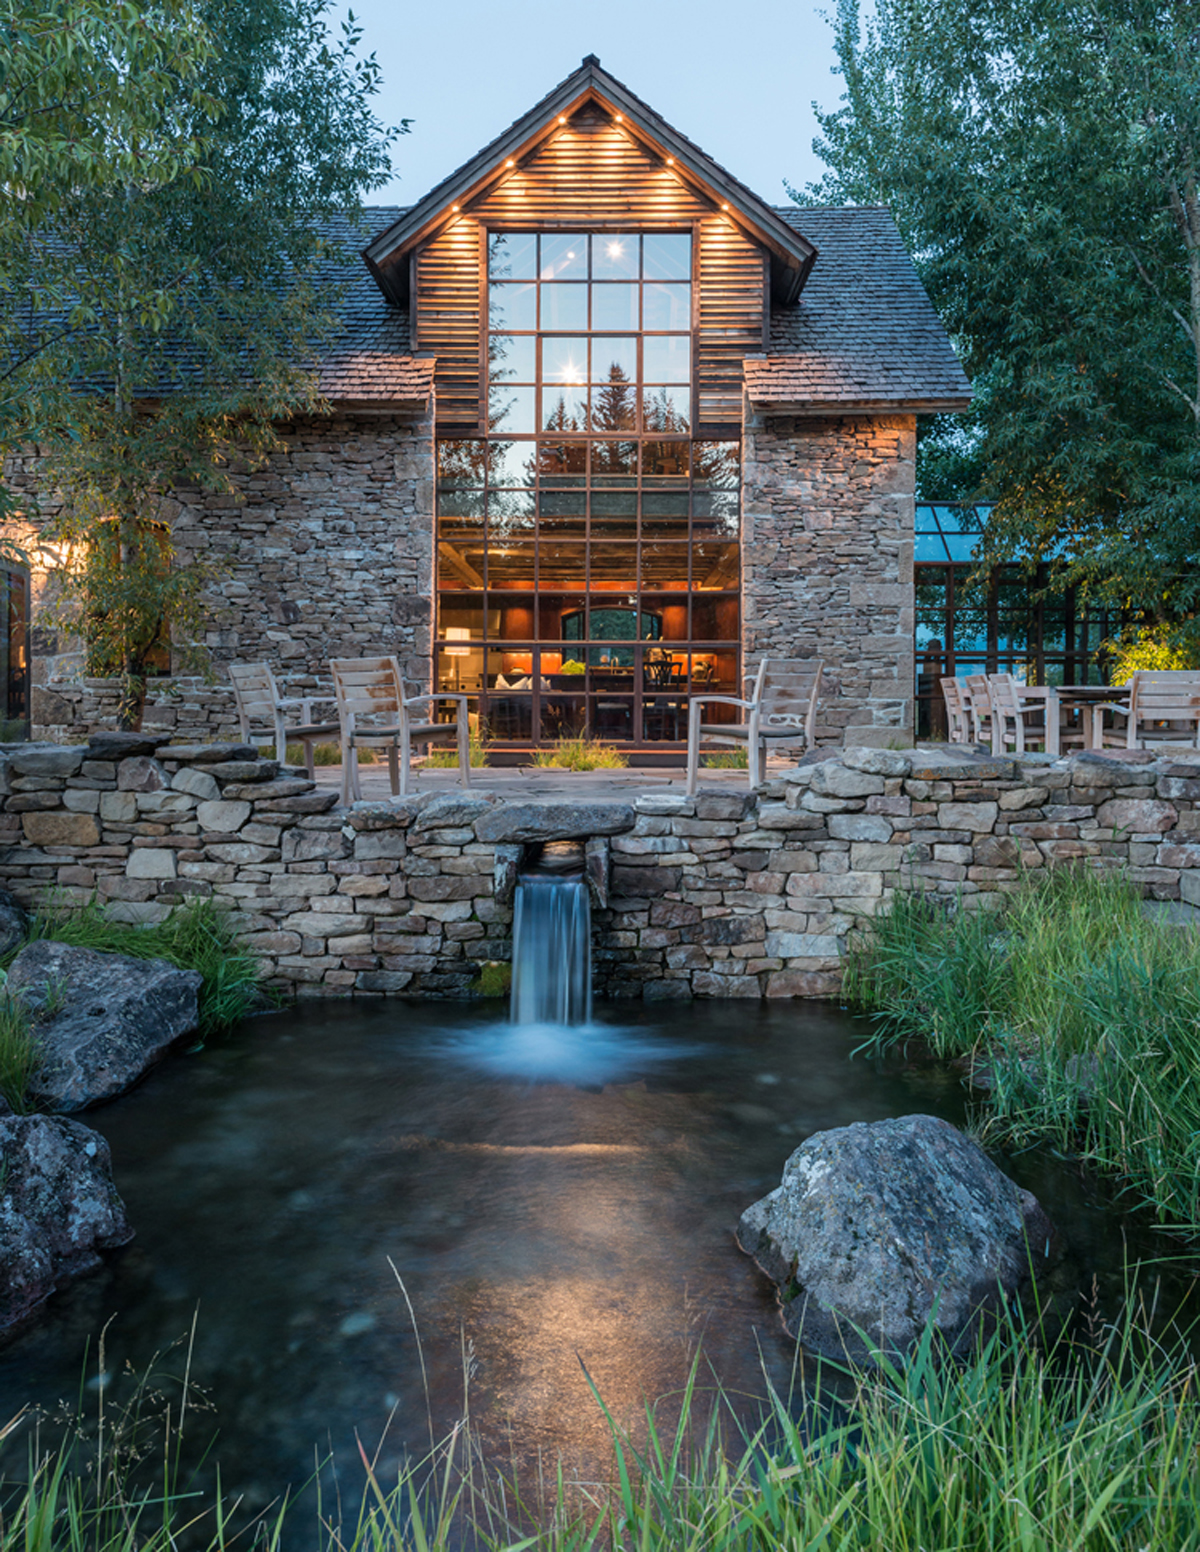 An 1890s Dairy Barn was dismantled, moved and reconstructed in Wyoming stone by stone to create this stunning JLF Design Build residence known as The Creamery (photo: Audrey Hall).